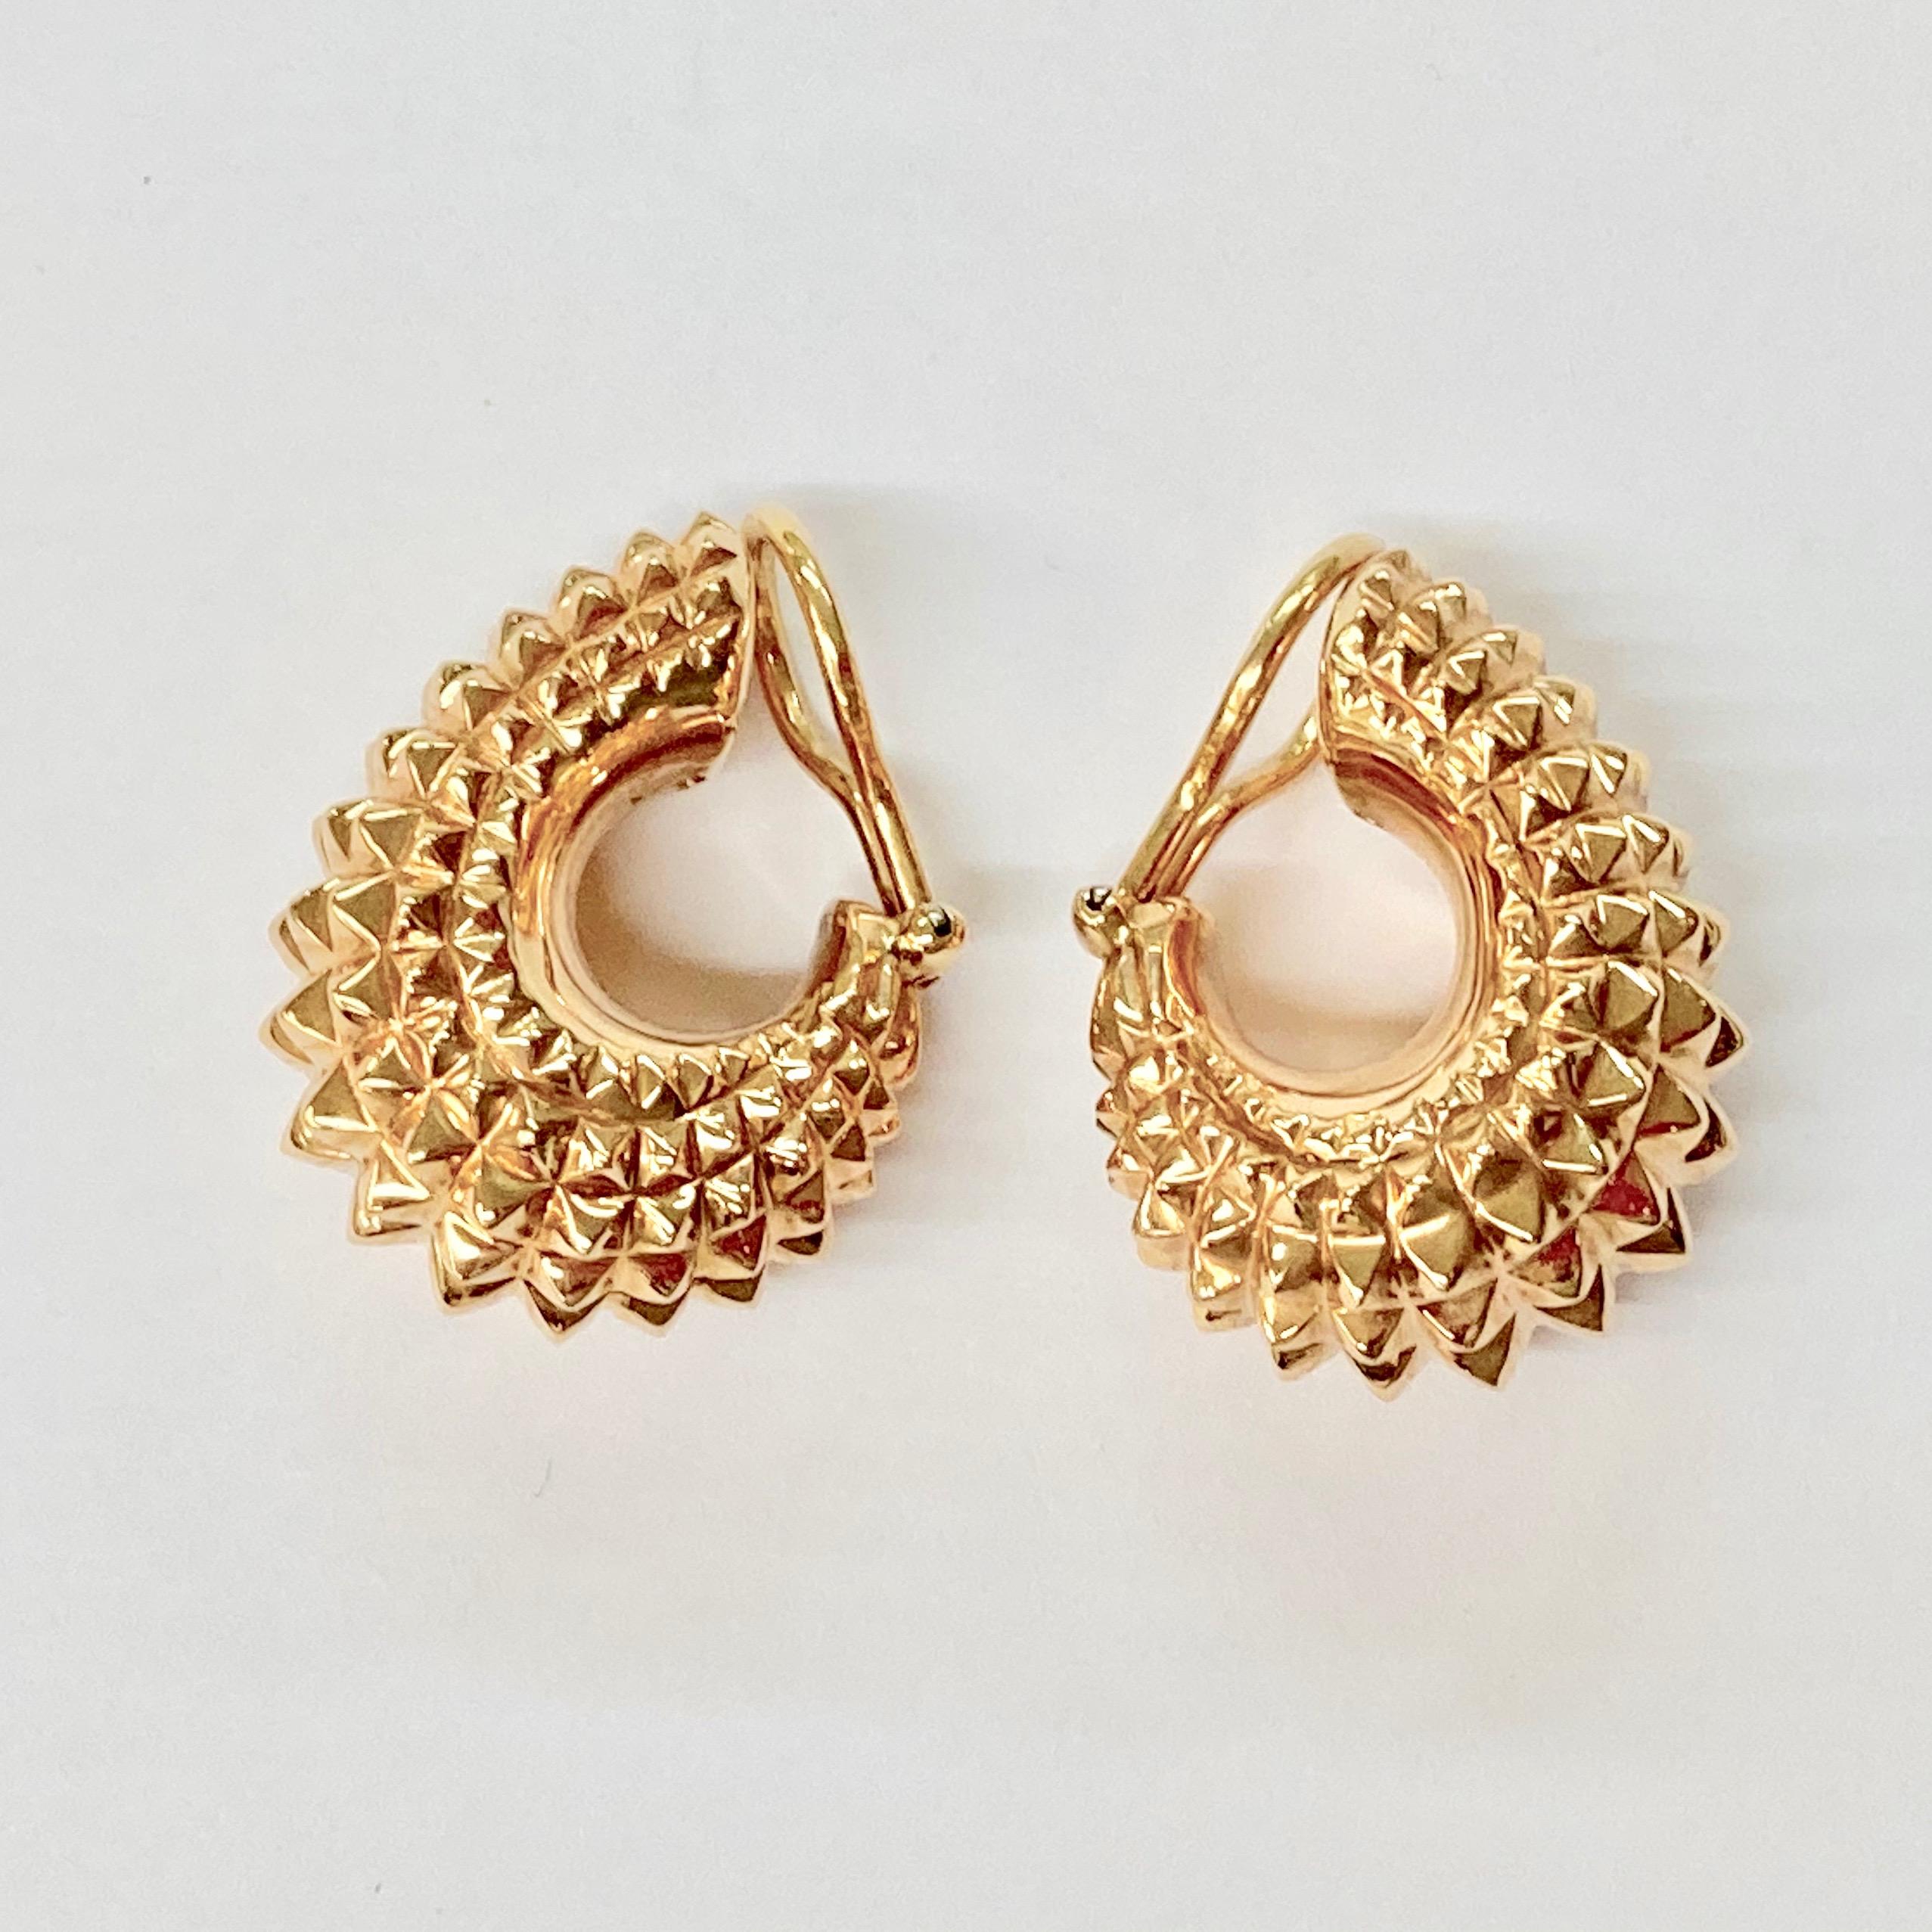 Women's Extravagant 18 Karat Rose Gold Pyramid Motiv Clip-On Earrings by Sueños Zurich For Sale